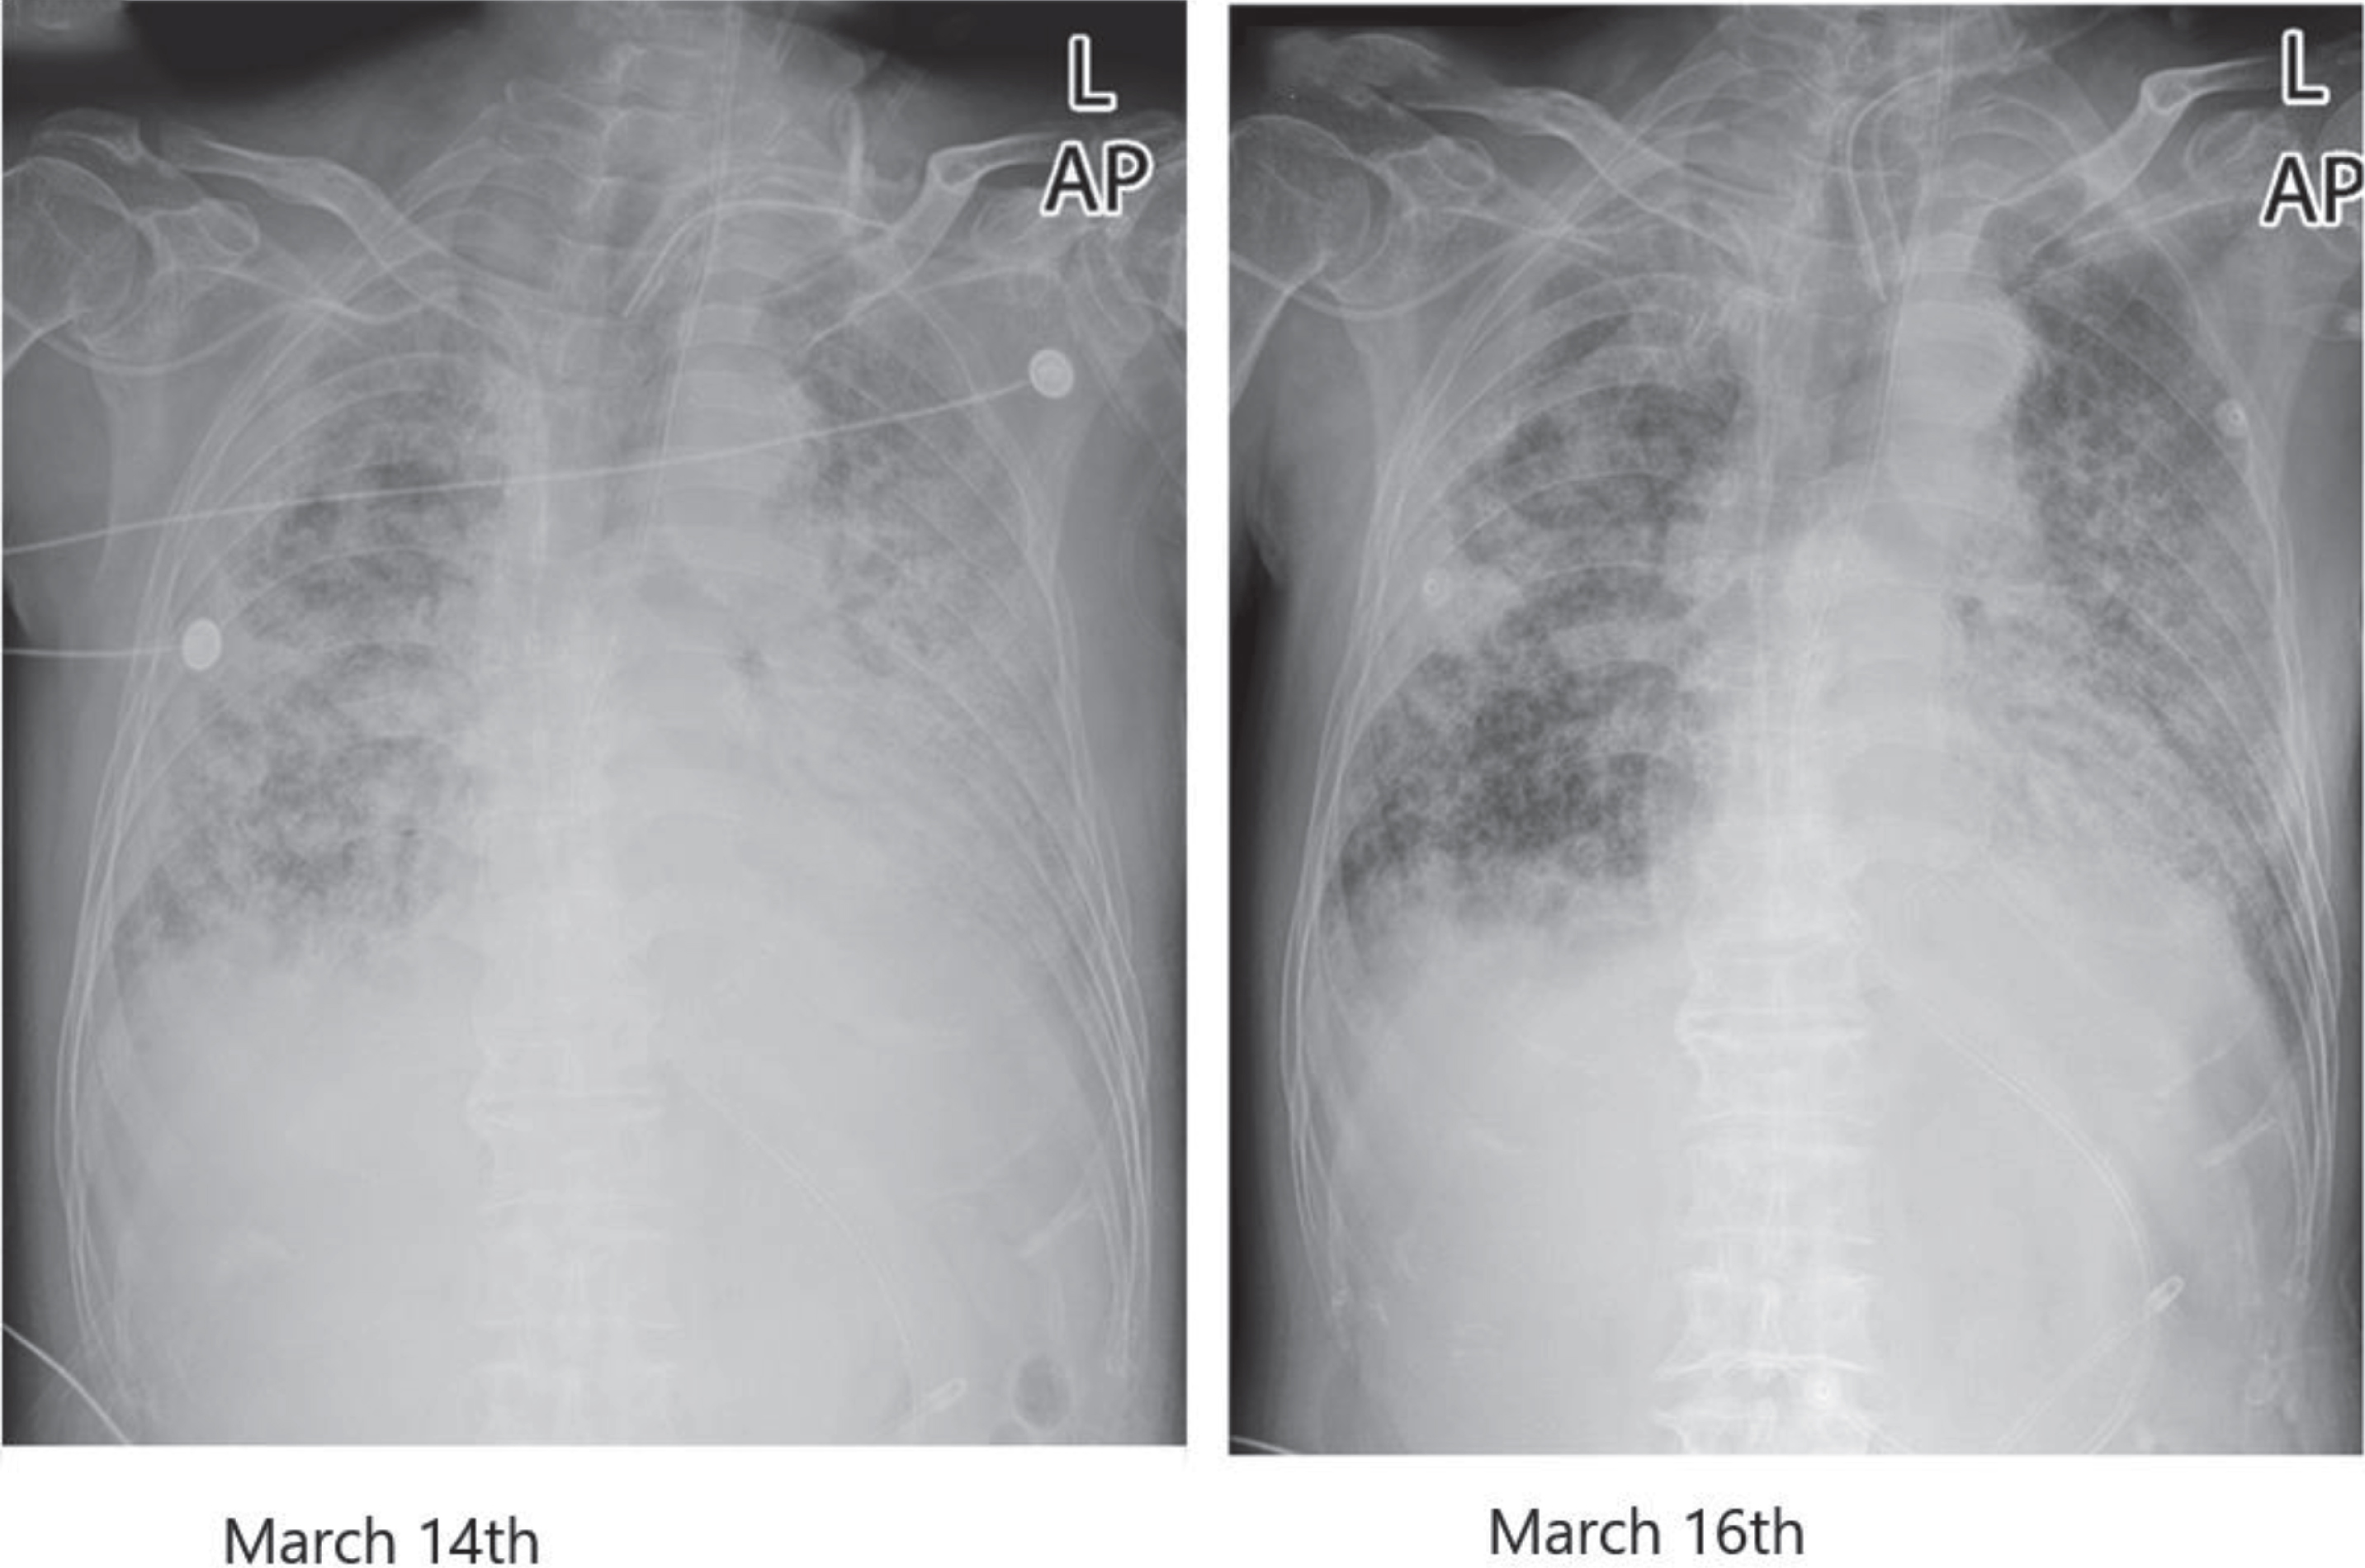 Chest radiograph comparison before and after treatment in case 2.